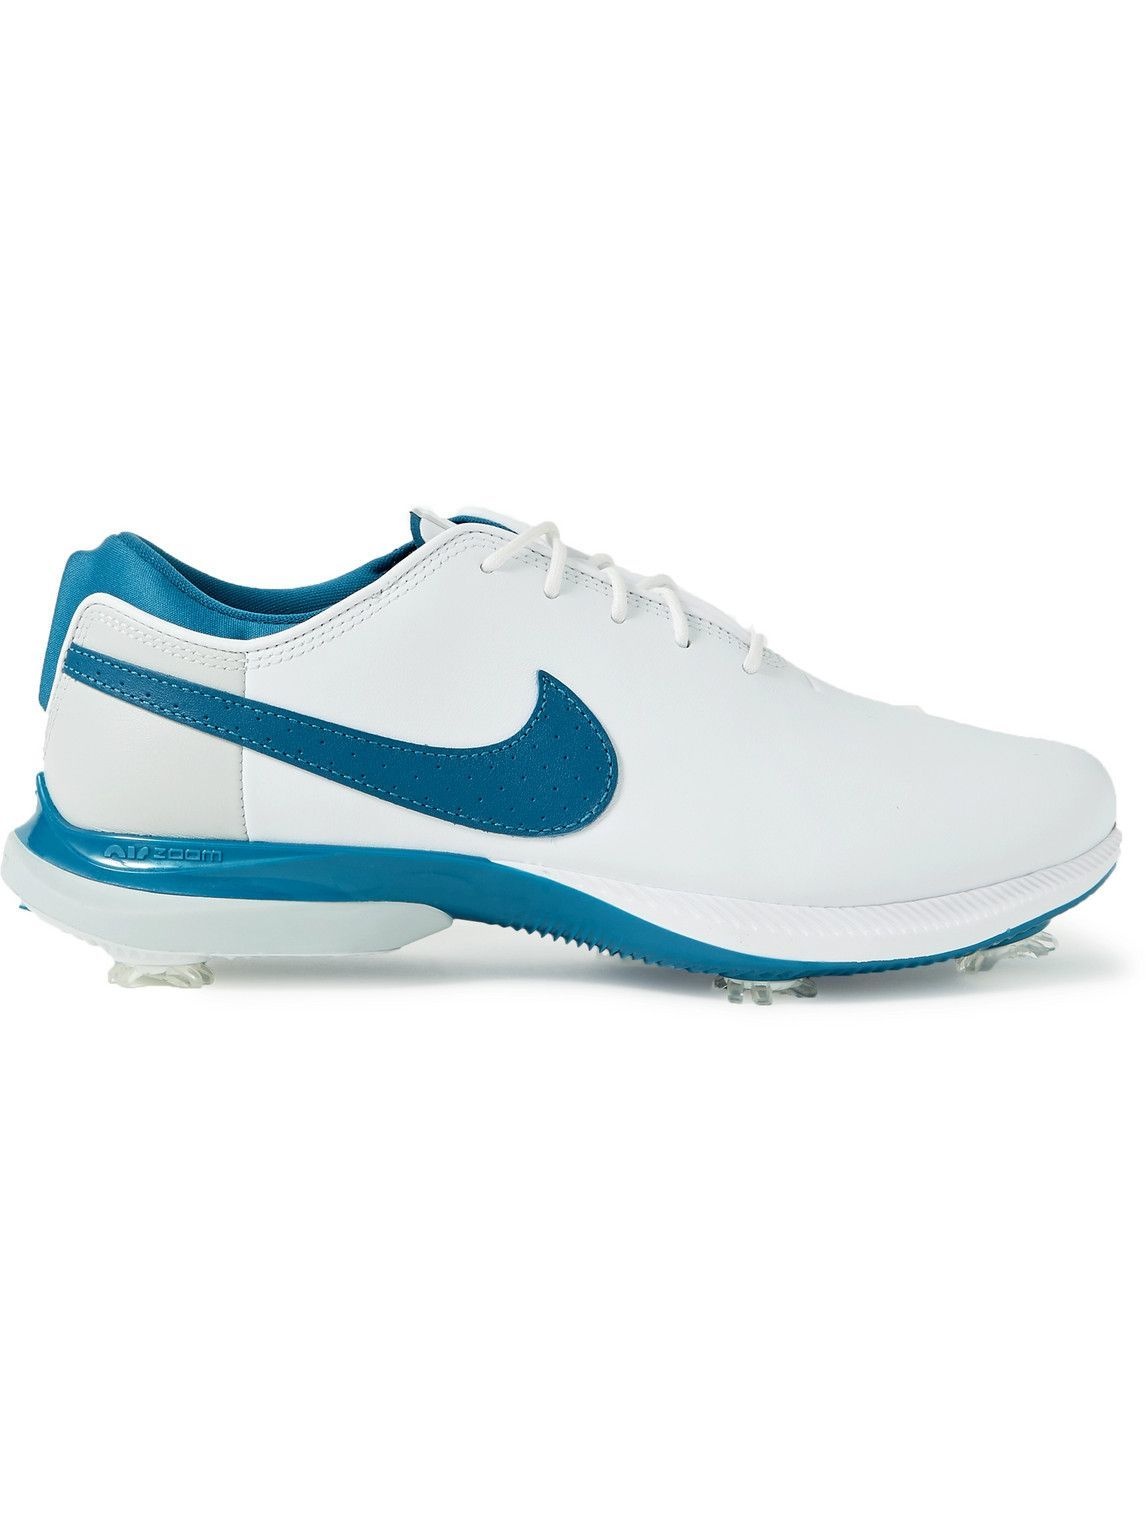 Converger Preferencia humor Nike Golf - Air Zoom Victory Tour 2 Leather Golf Shoes - Blue Nike Golf